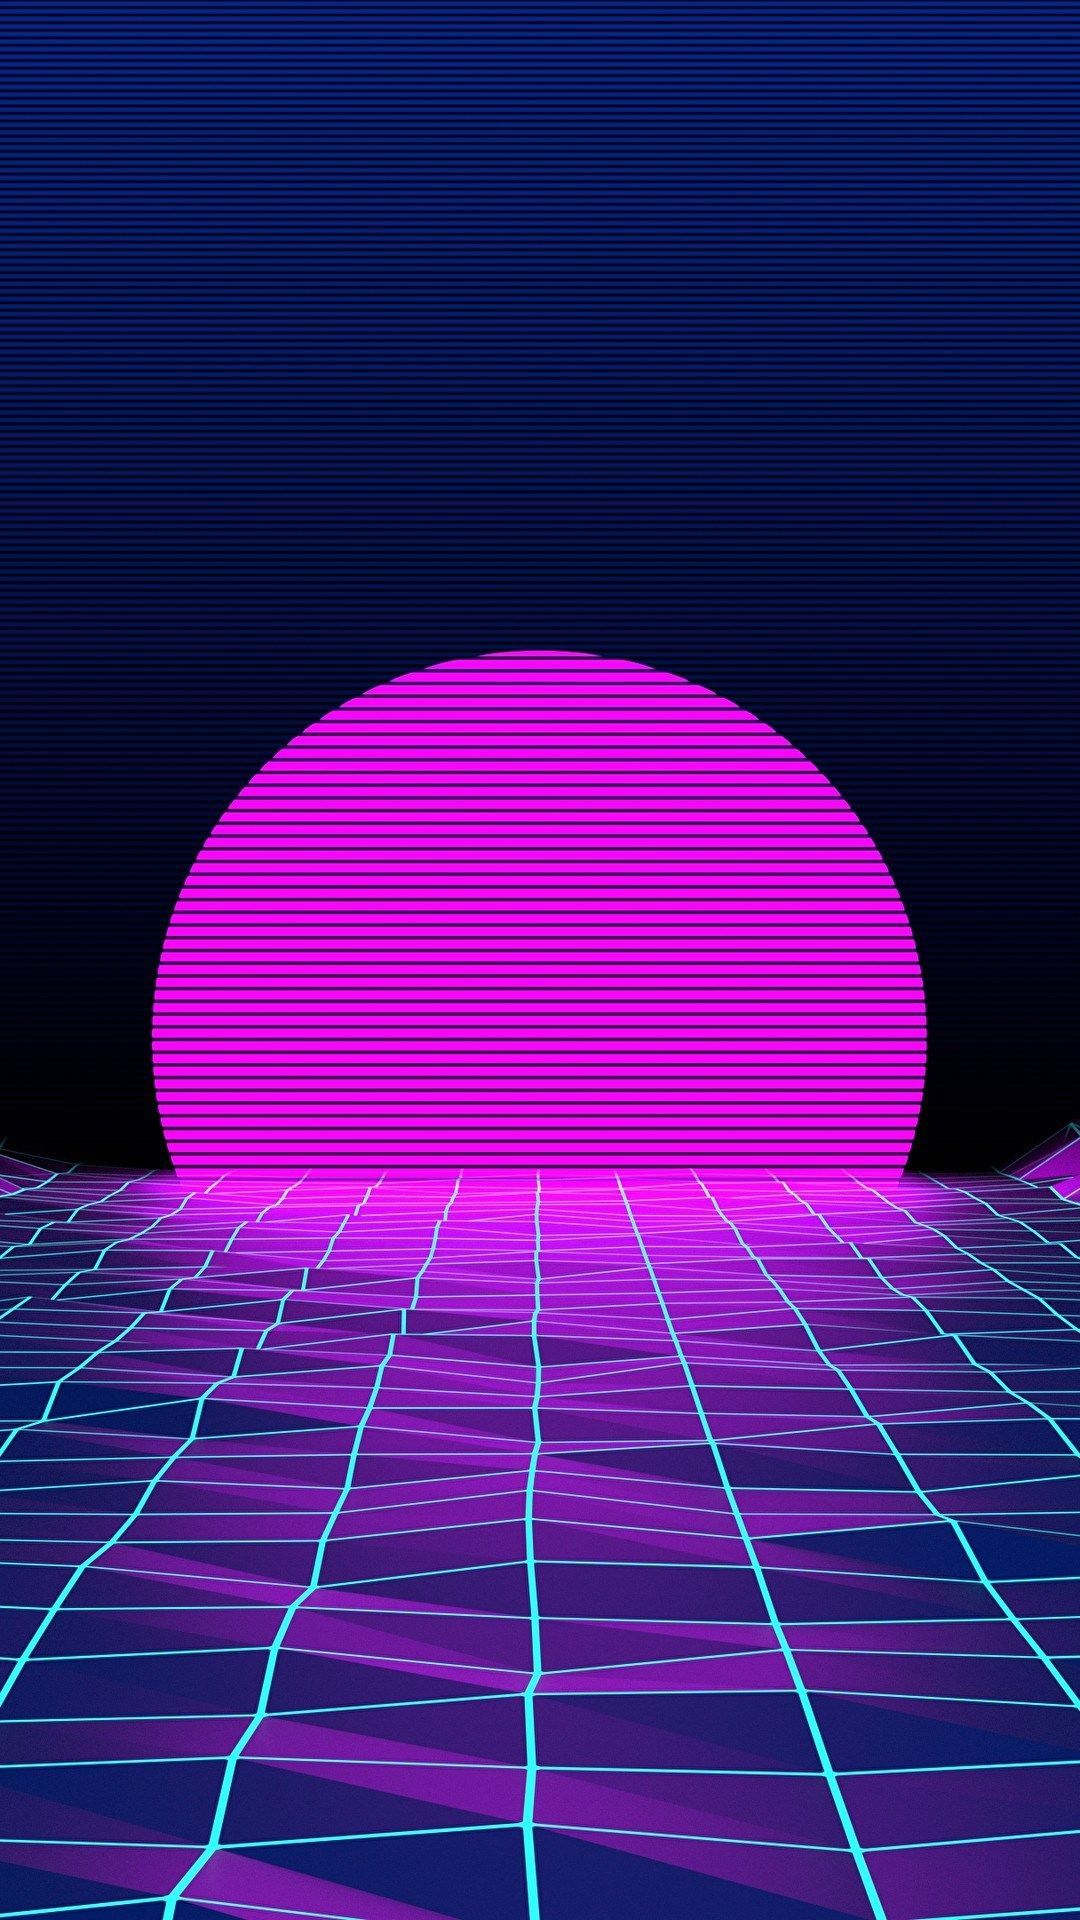 80s Neon ShapesWallpapers on Behance